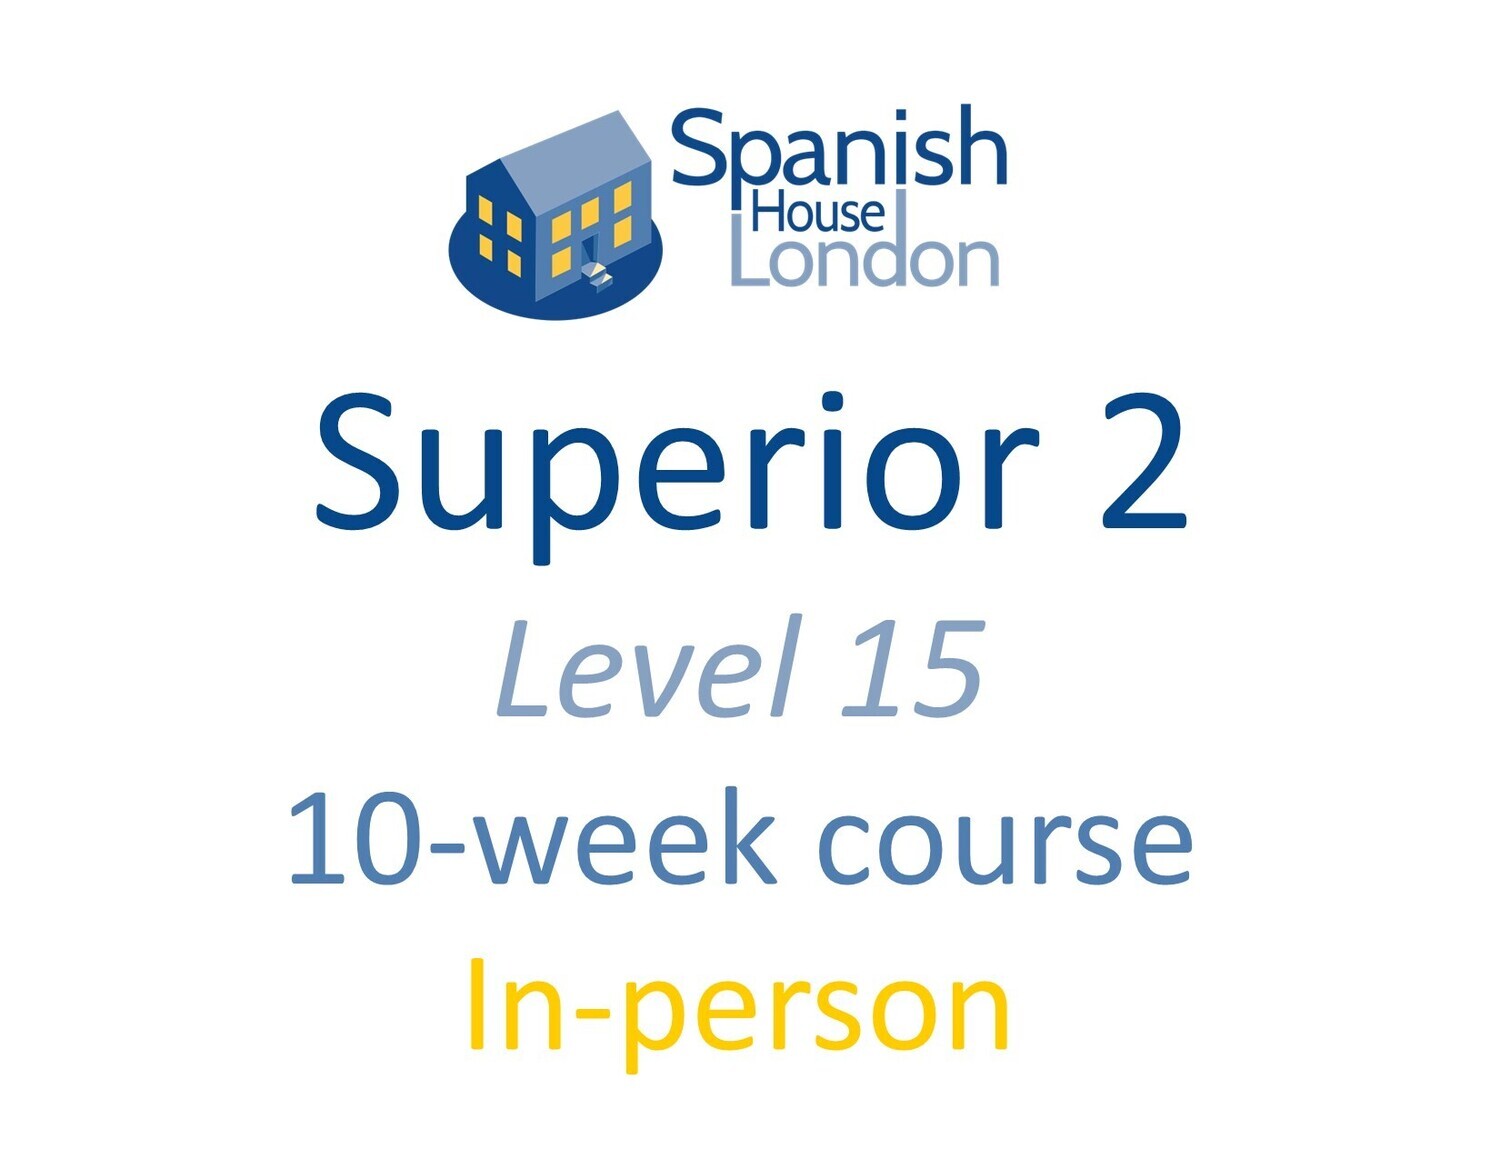 Superior 2 Course starting on 30th June at 6pm in Clapham North